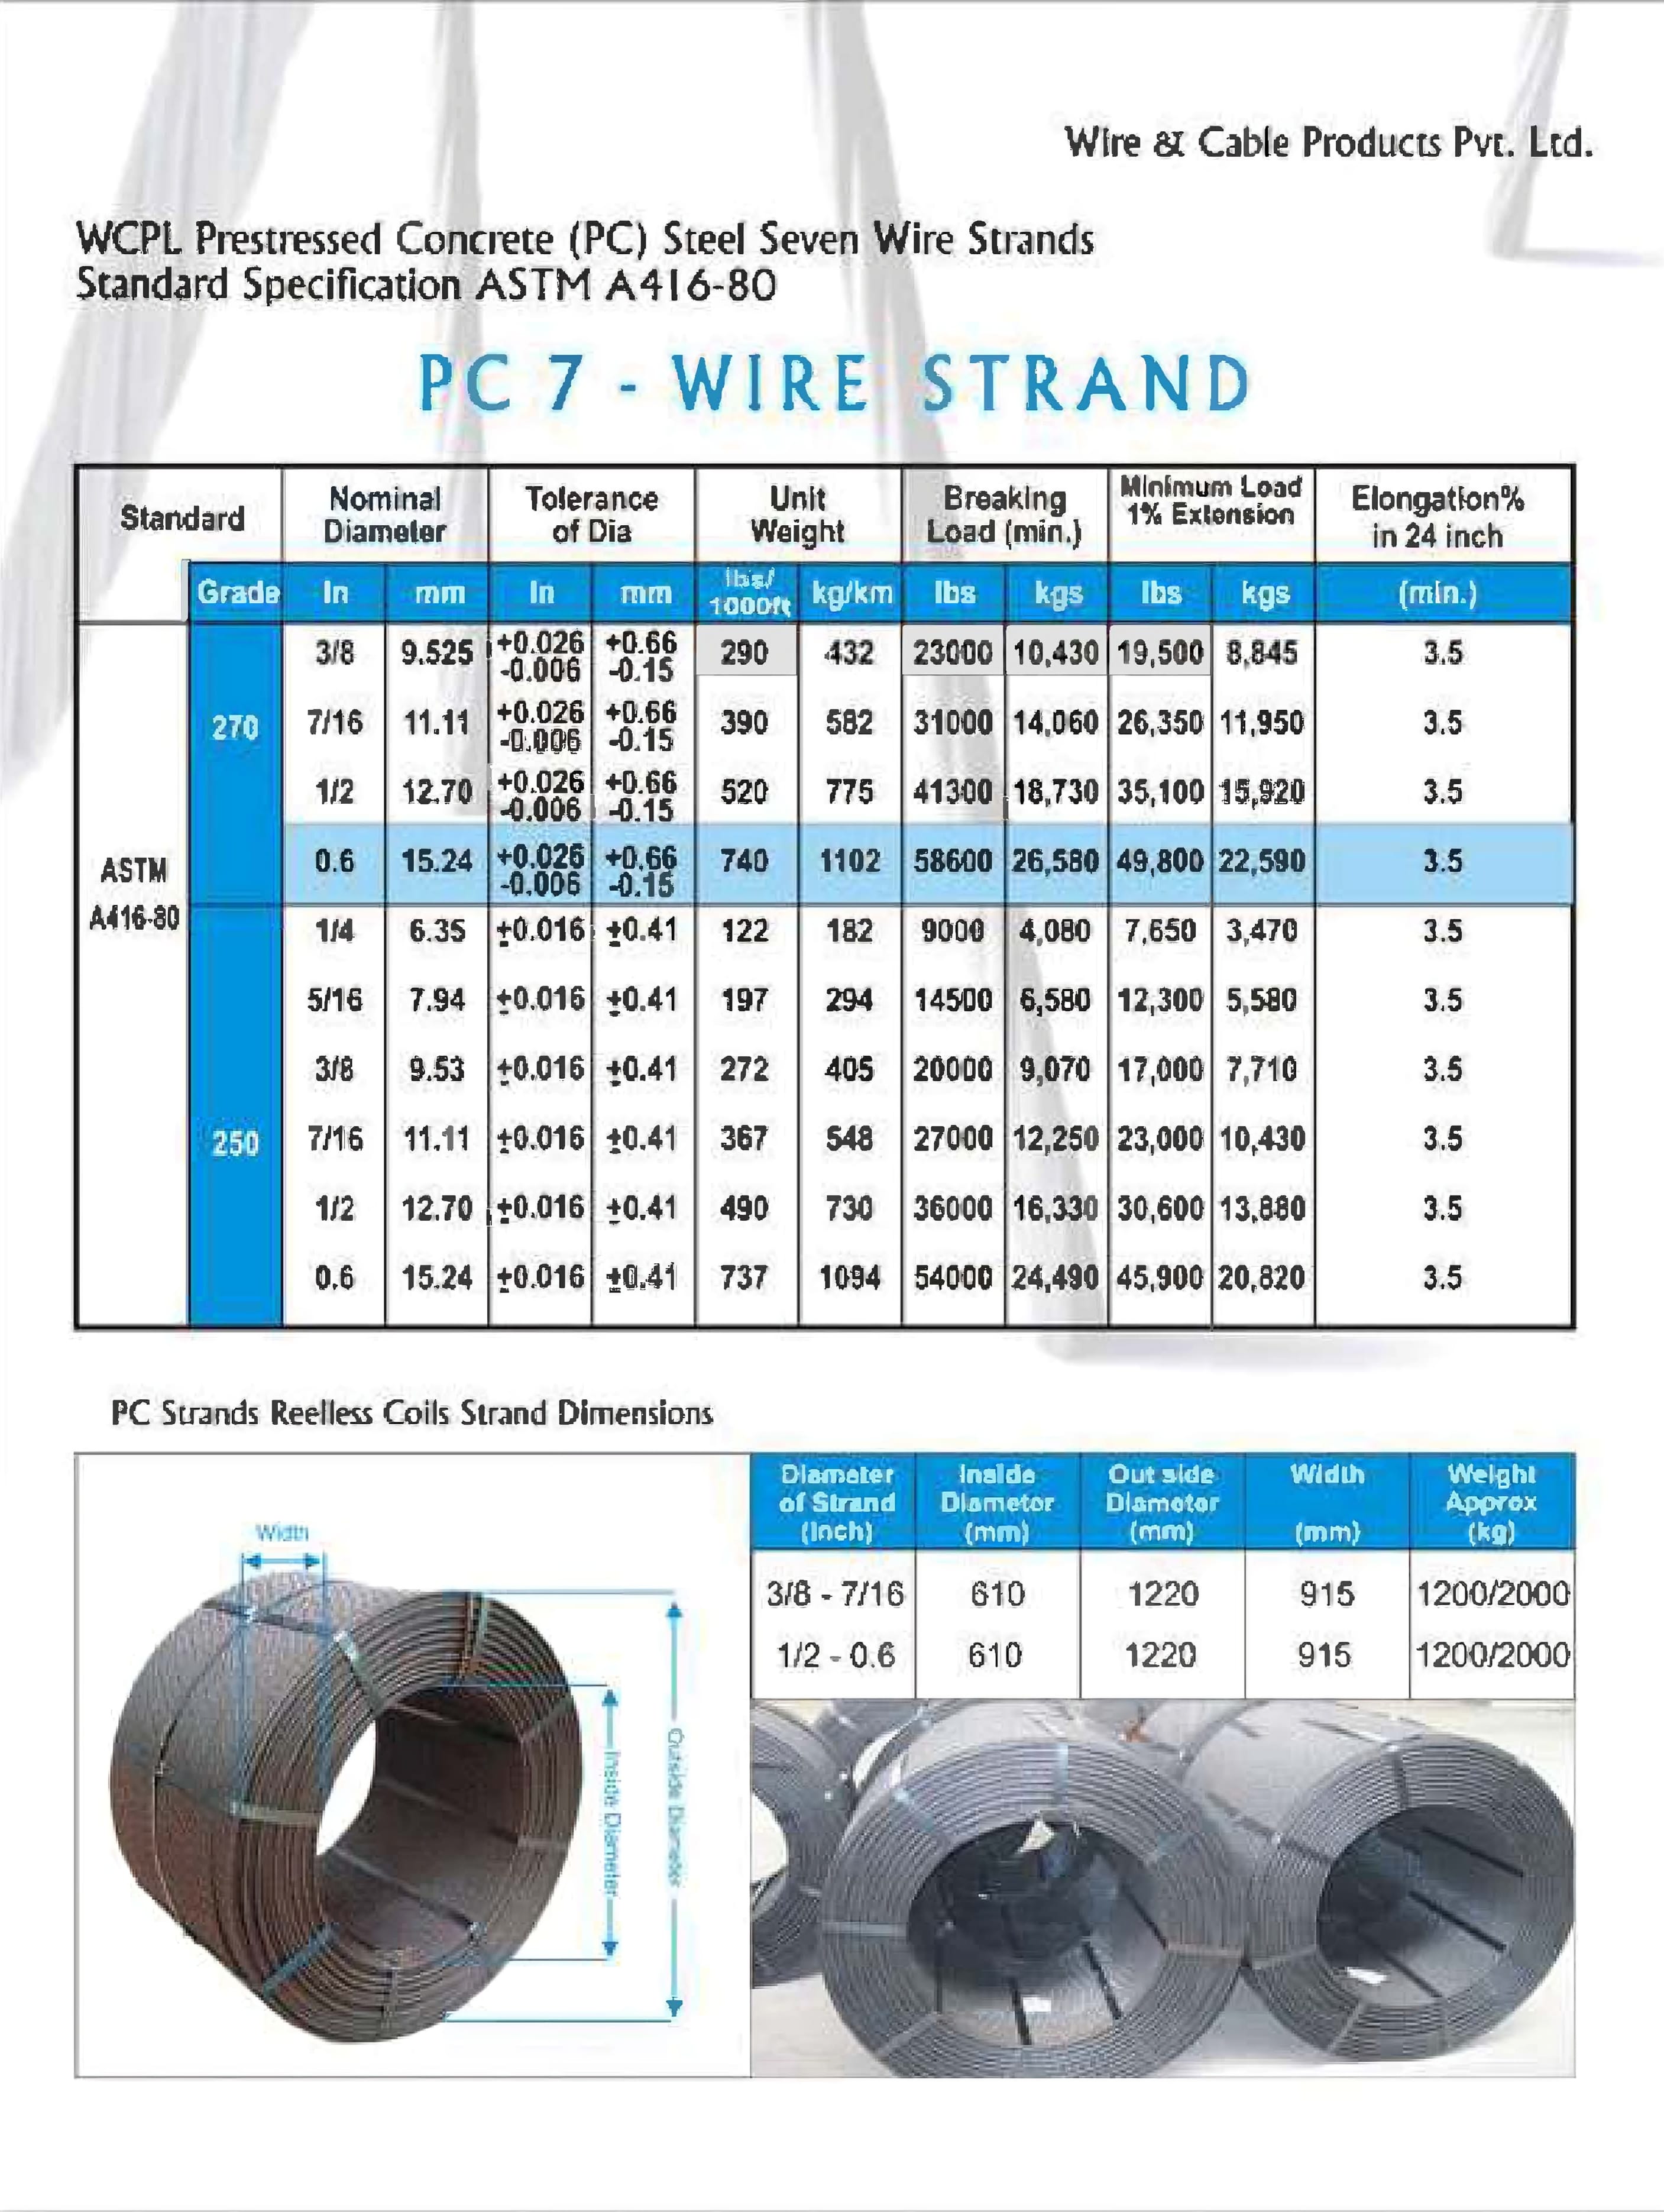 Wire Strand Complete Sheet